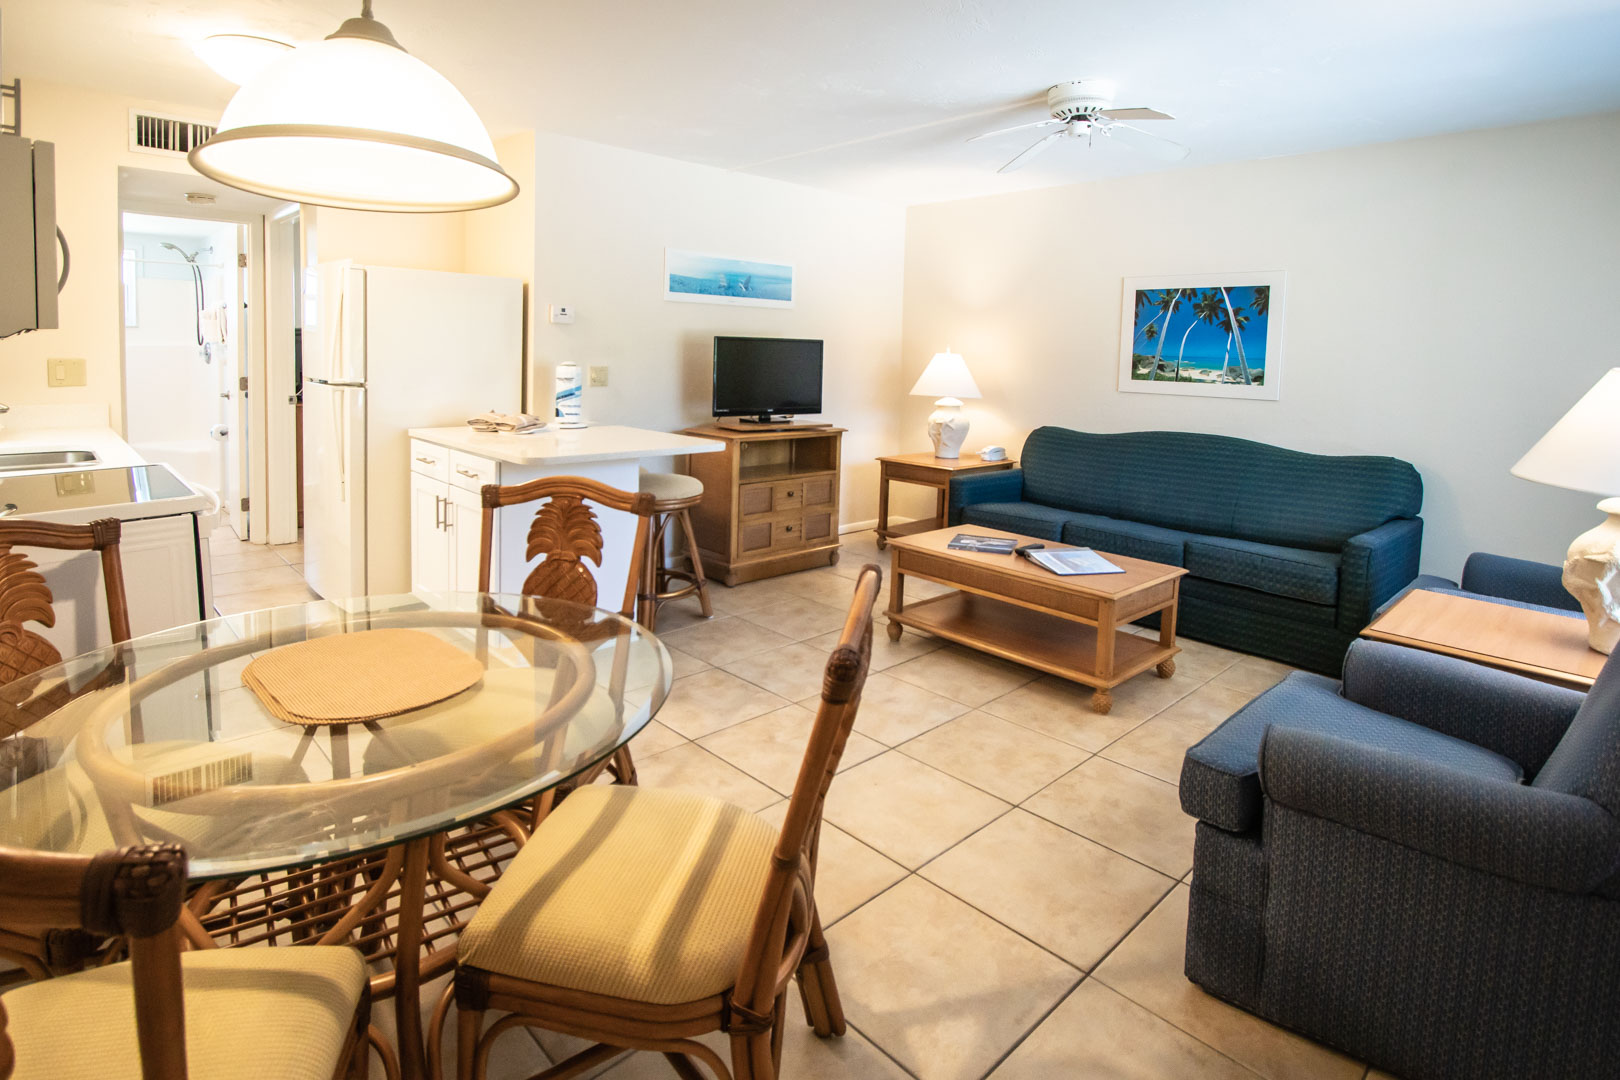 A spacious living room at VRI's Windward Passage Resort in Fort Myers Beach, Florida.